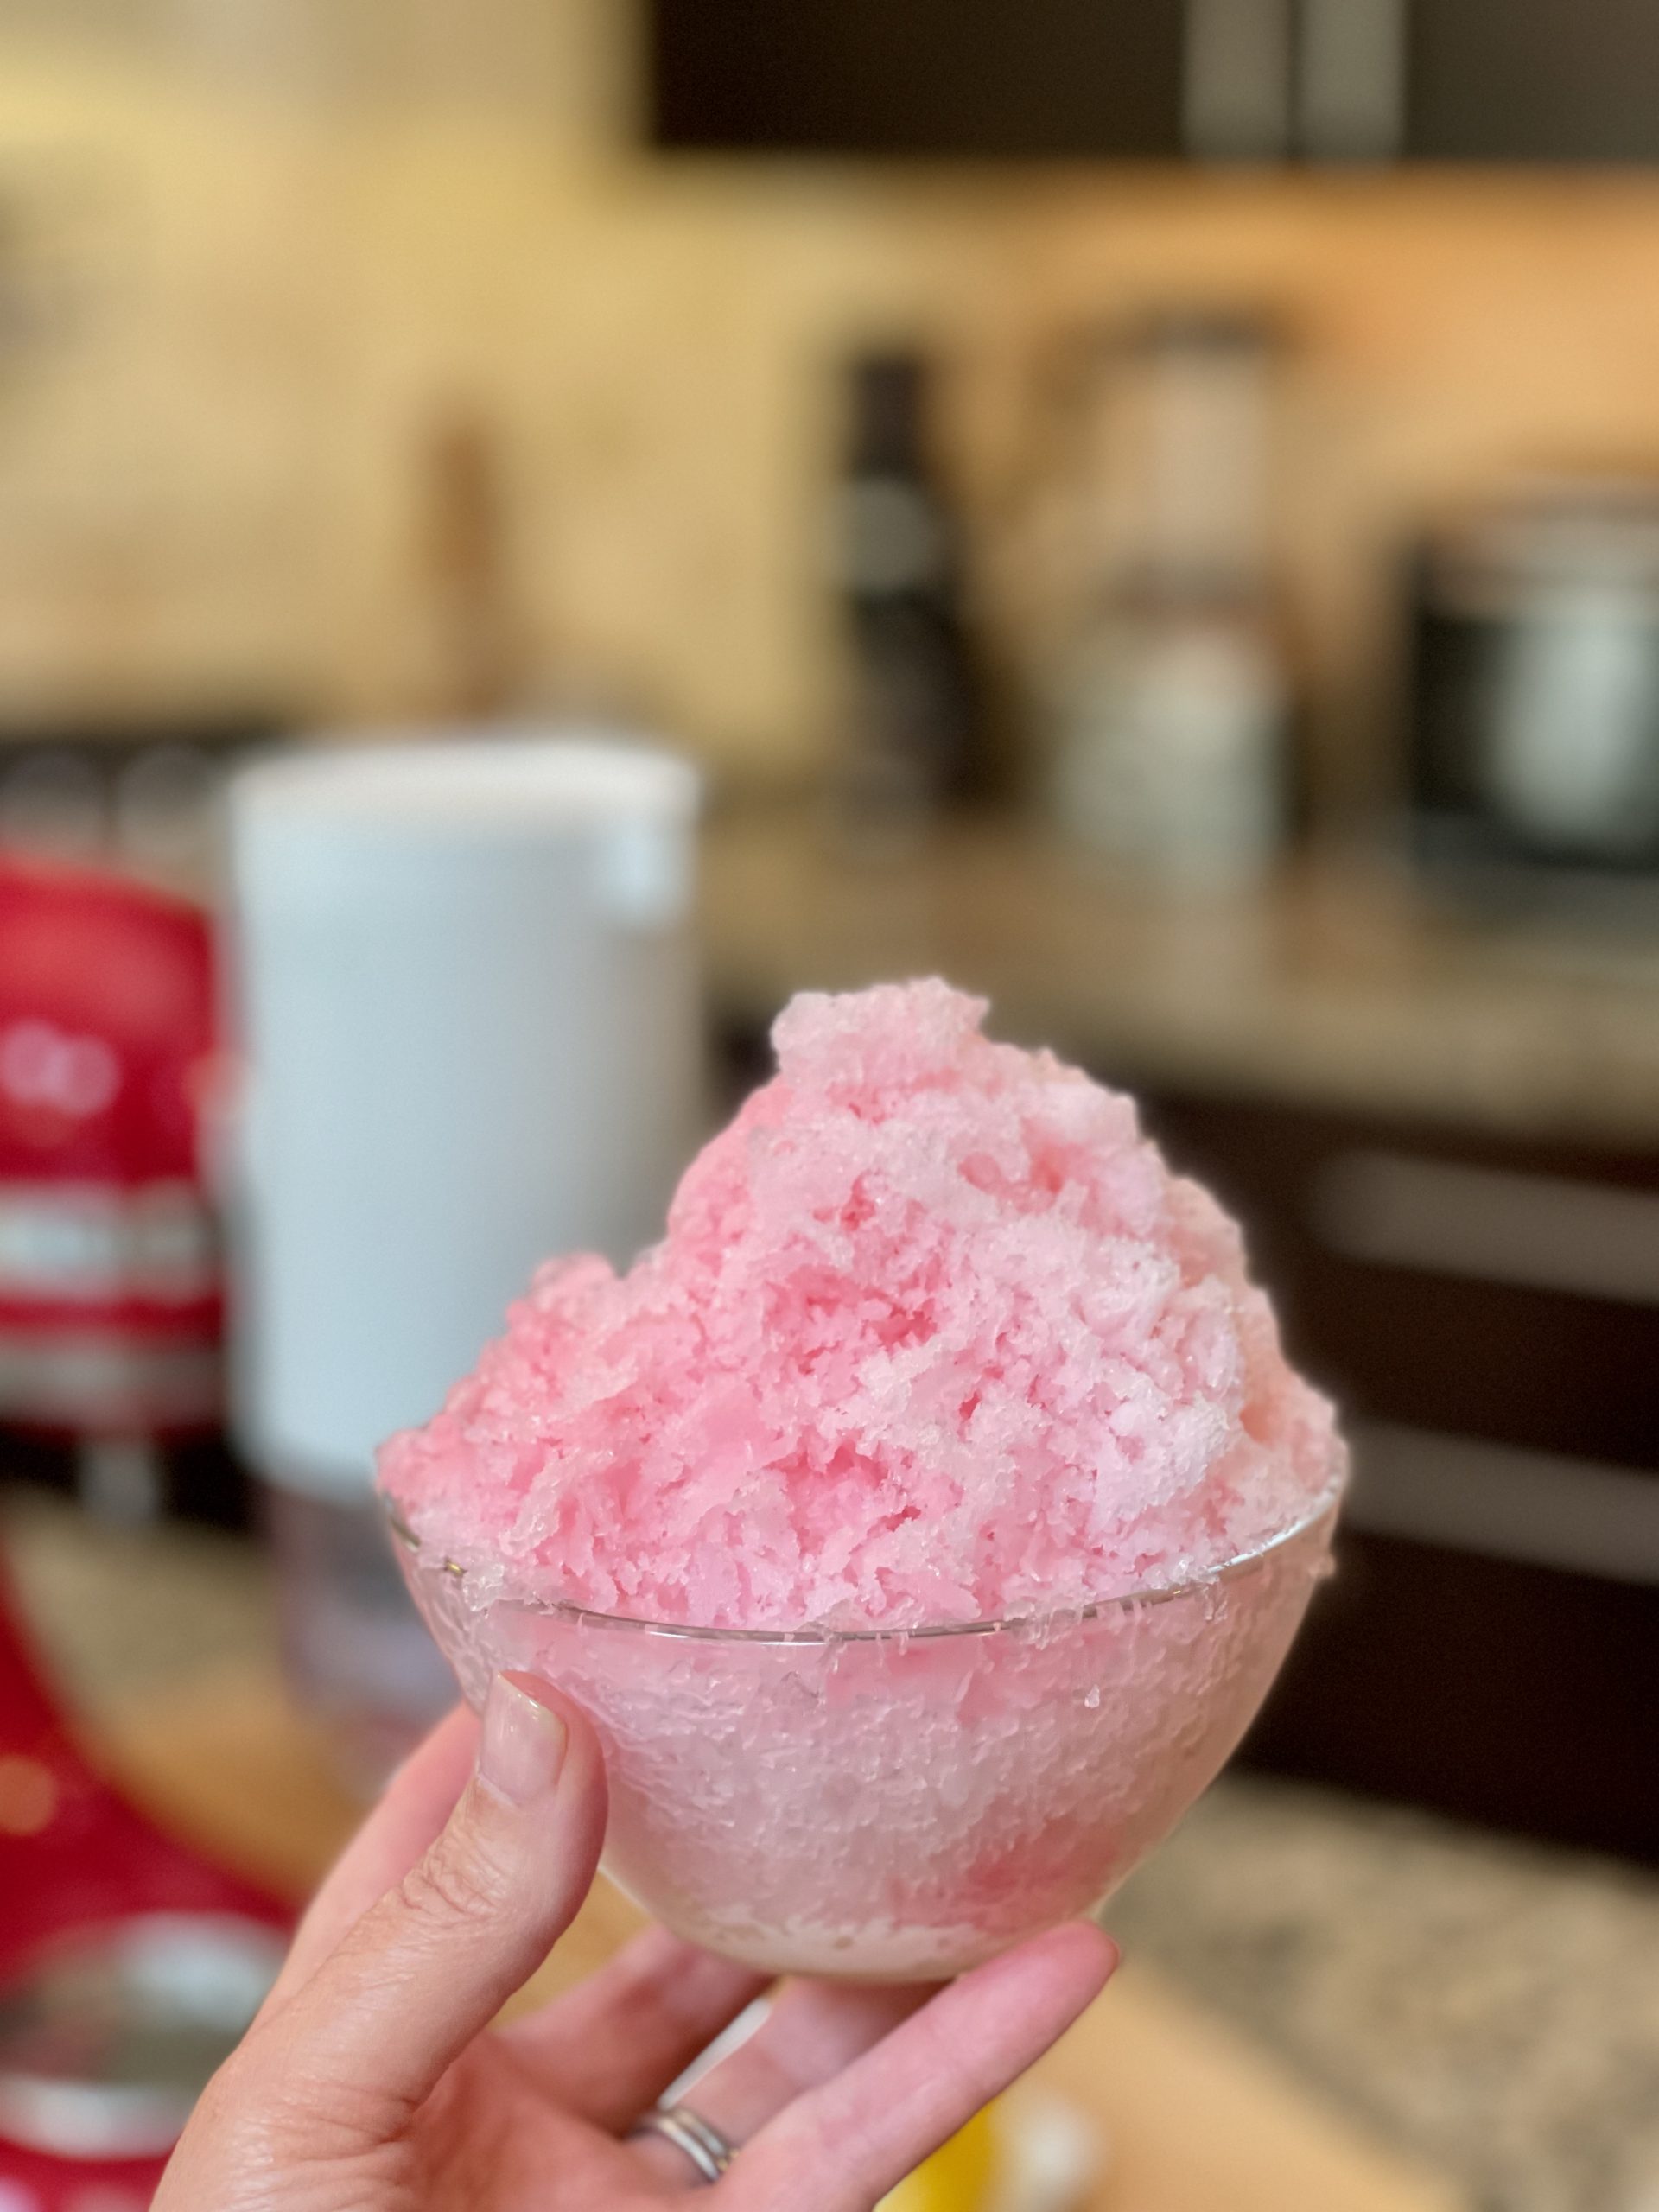 https://www.epicuricloud.com/wp-content/uploads/2022/05/Strawberry-Lemonade-Shave-Ice-so-syrup-in-hand-scaled.jpeg